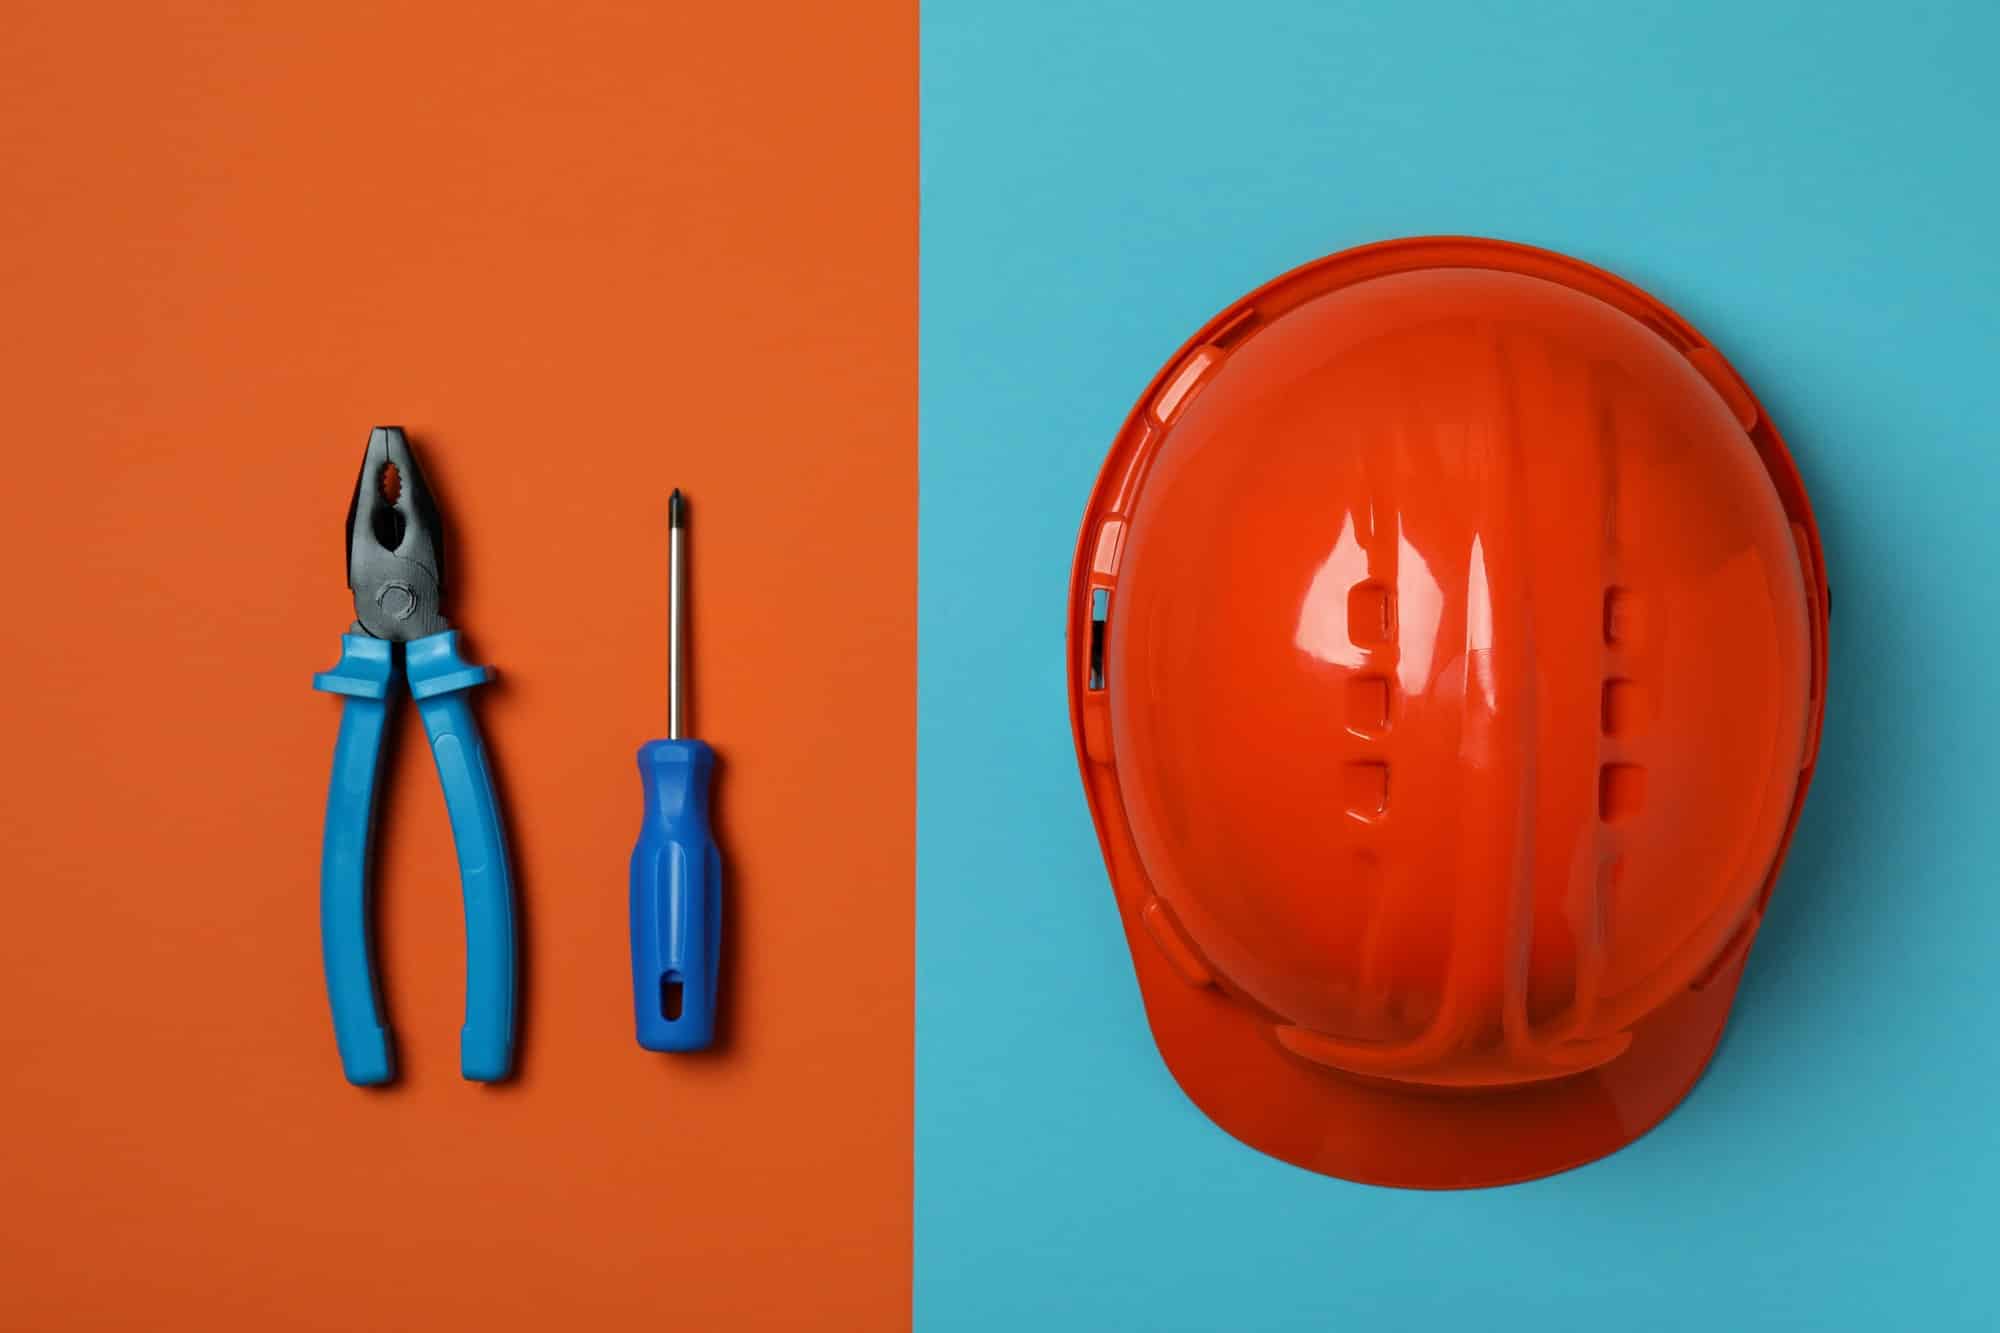 Hard hat and tools on two tone background, top view